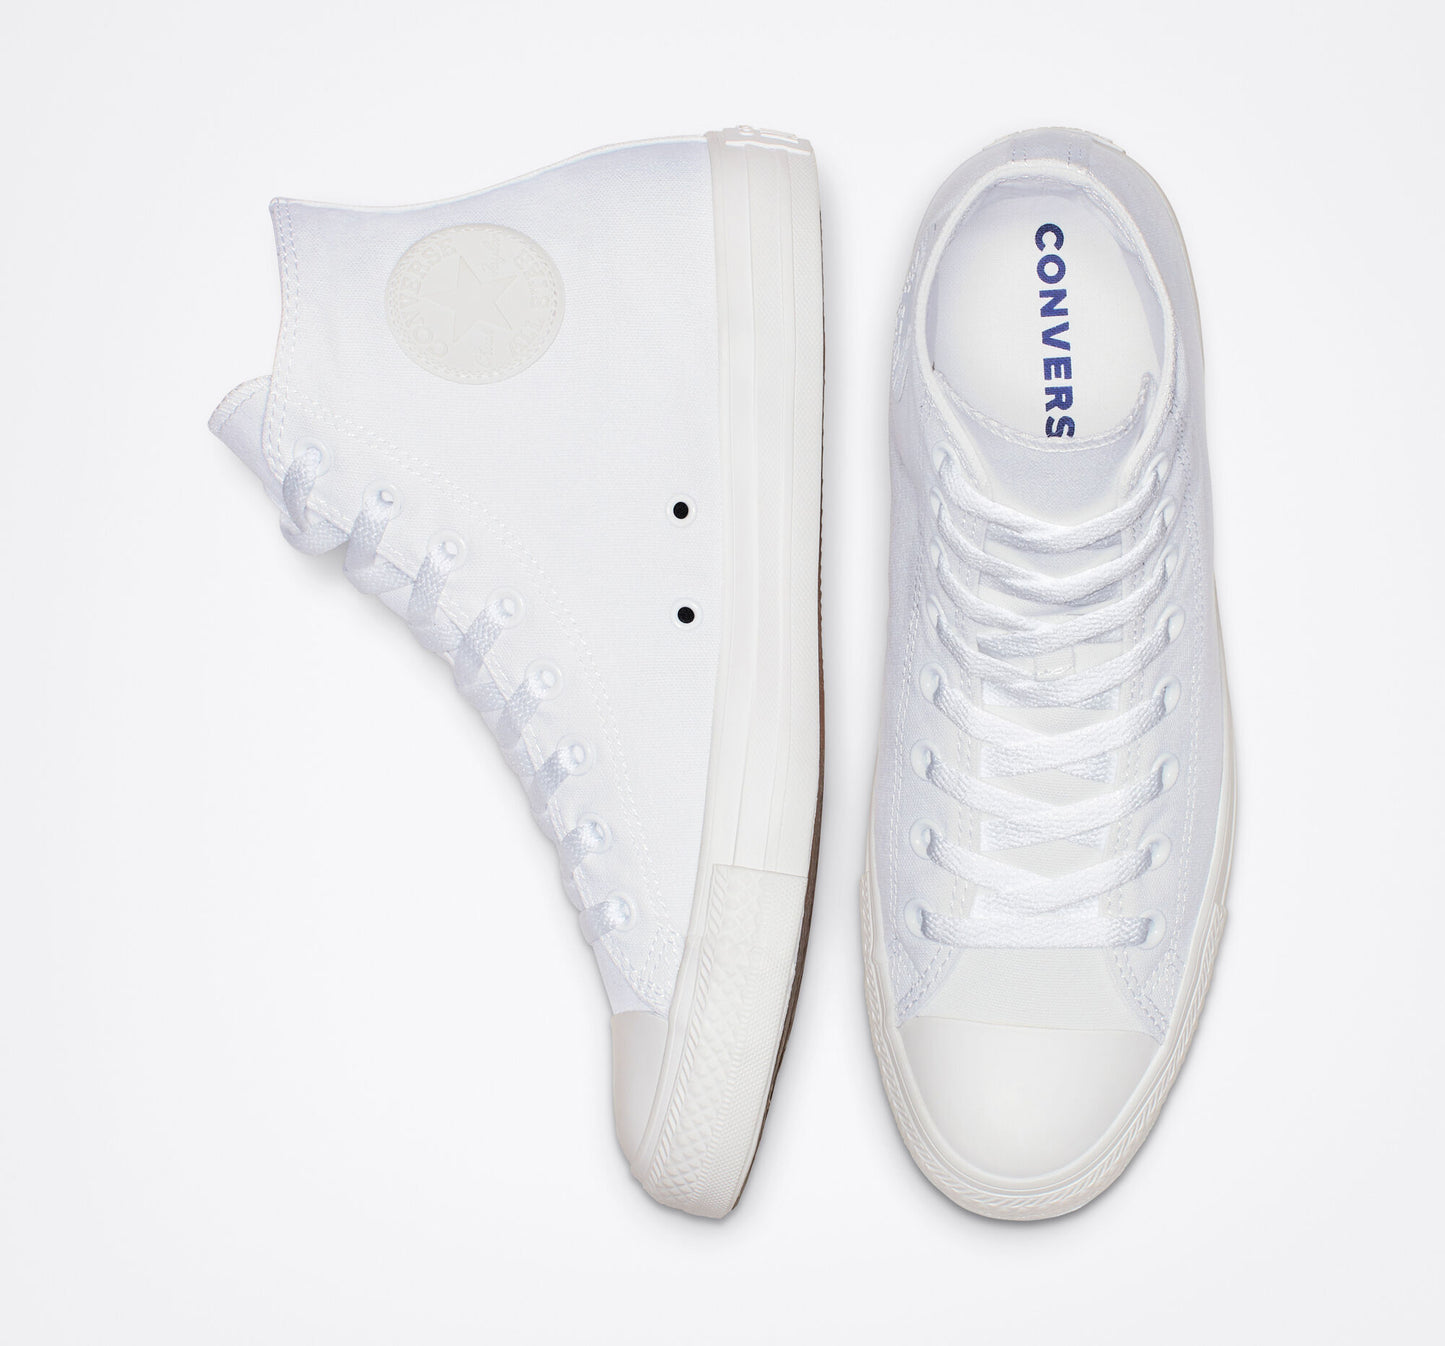 Converse Adult Chuck Taylor All Star Classic High Tops White Monochrome